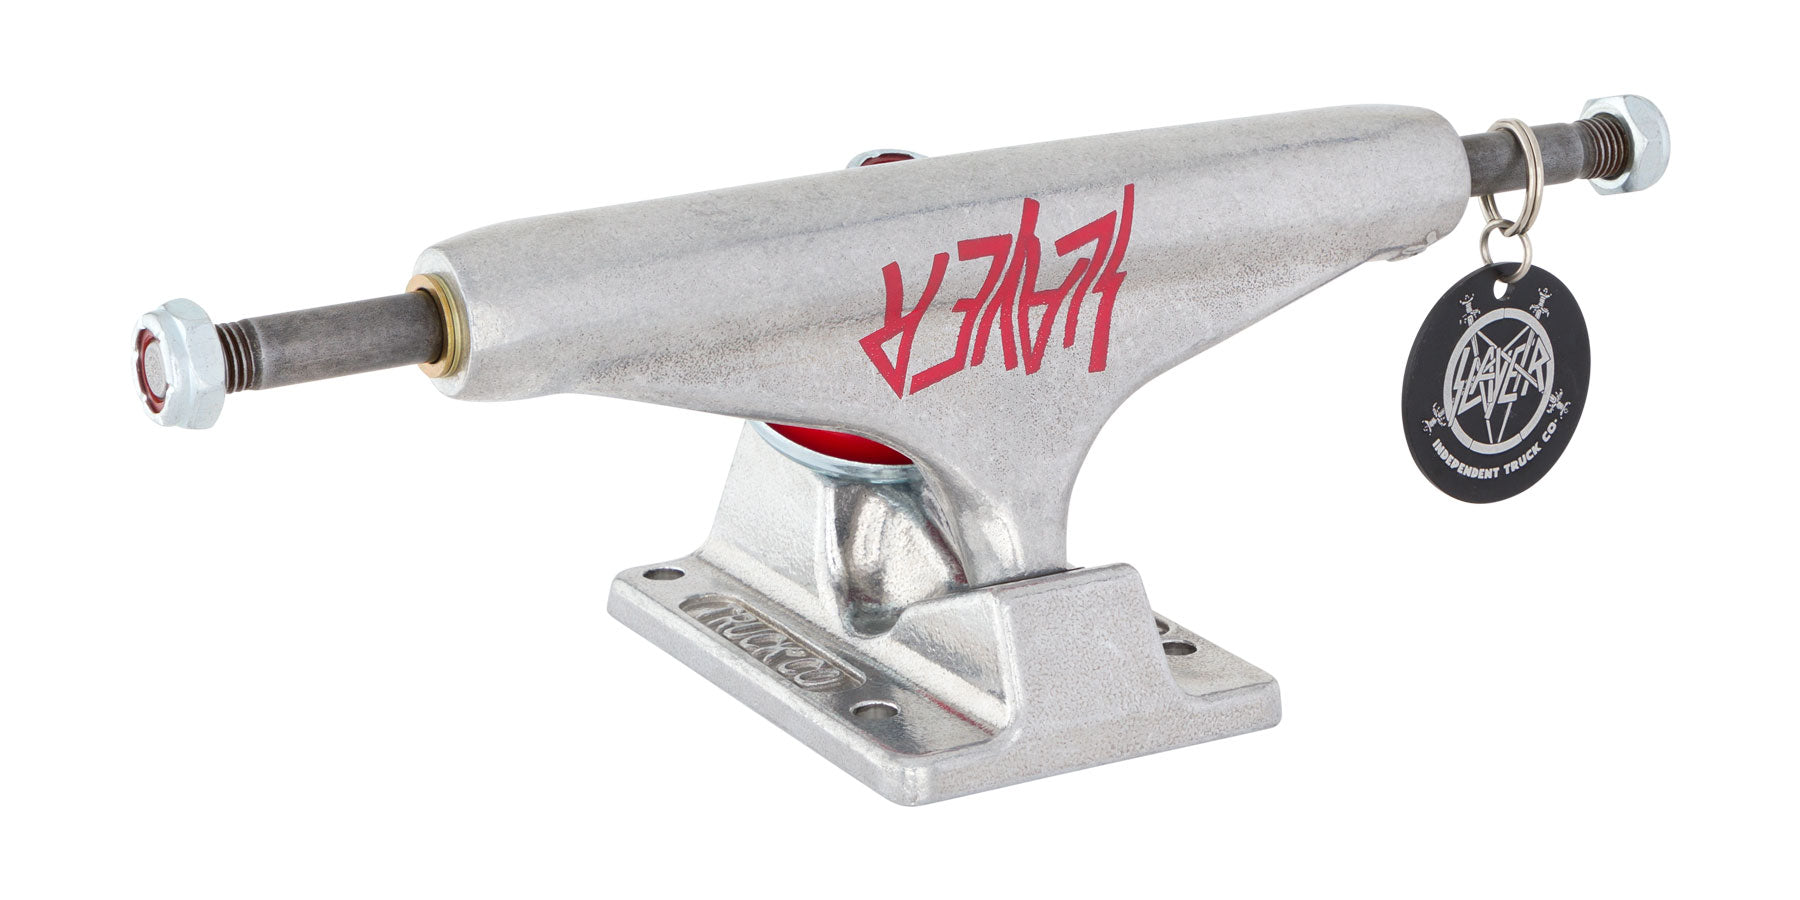 Independent Stage 11 Forged Hollow Polished Slayer Standard Skateboard Trucks - Invisible Board Shop